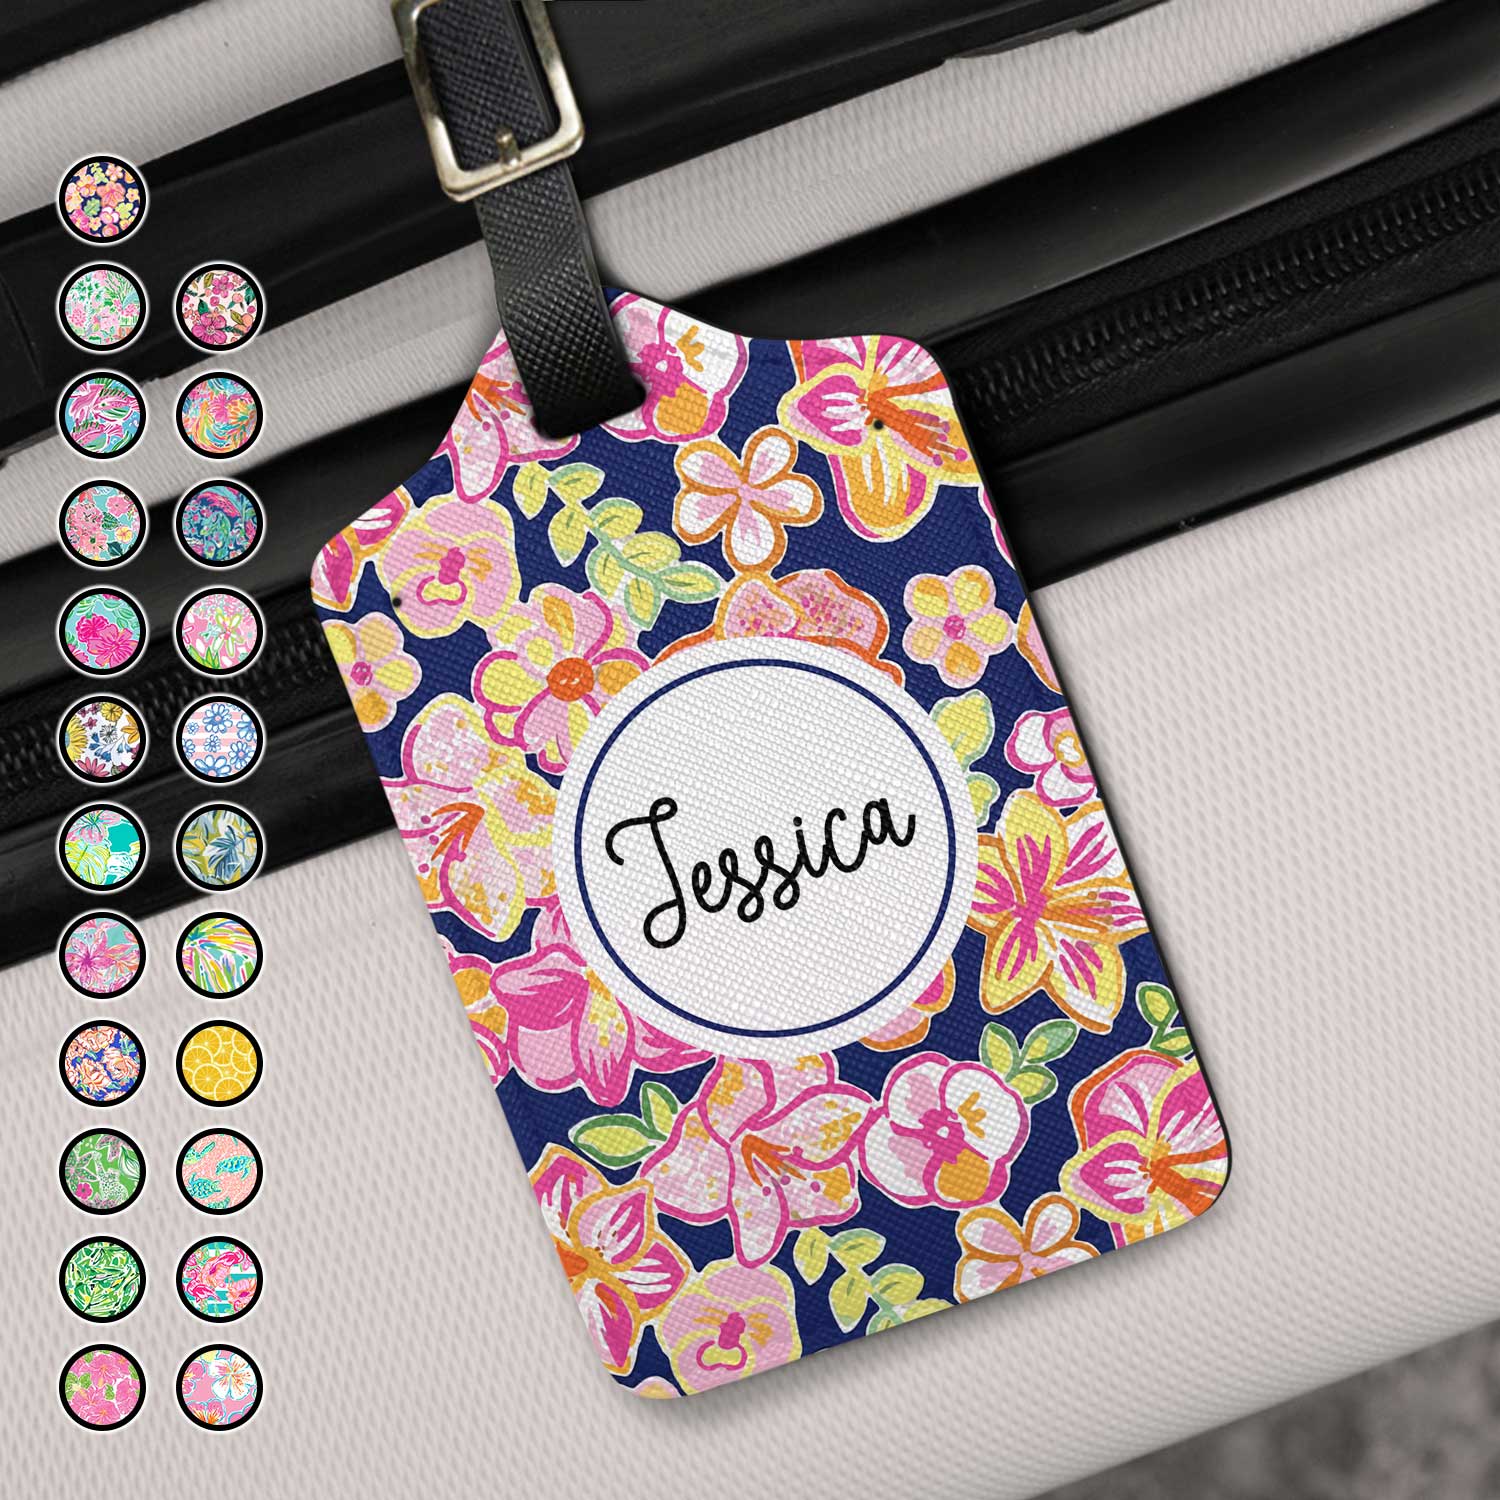 Tropical Name Tag - Gift For Traveling Lovers, Travelers - Personalized Luggage Tag